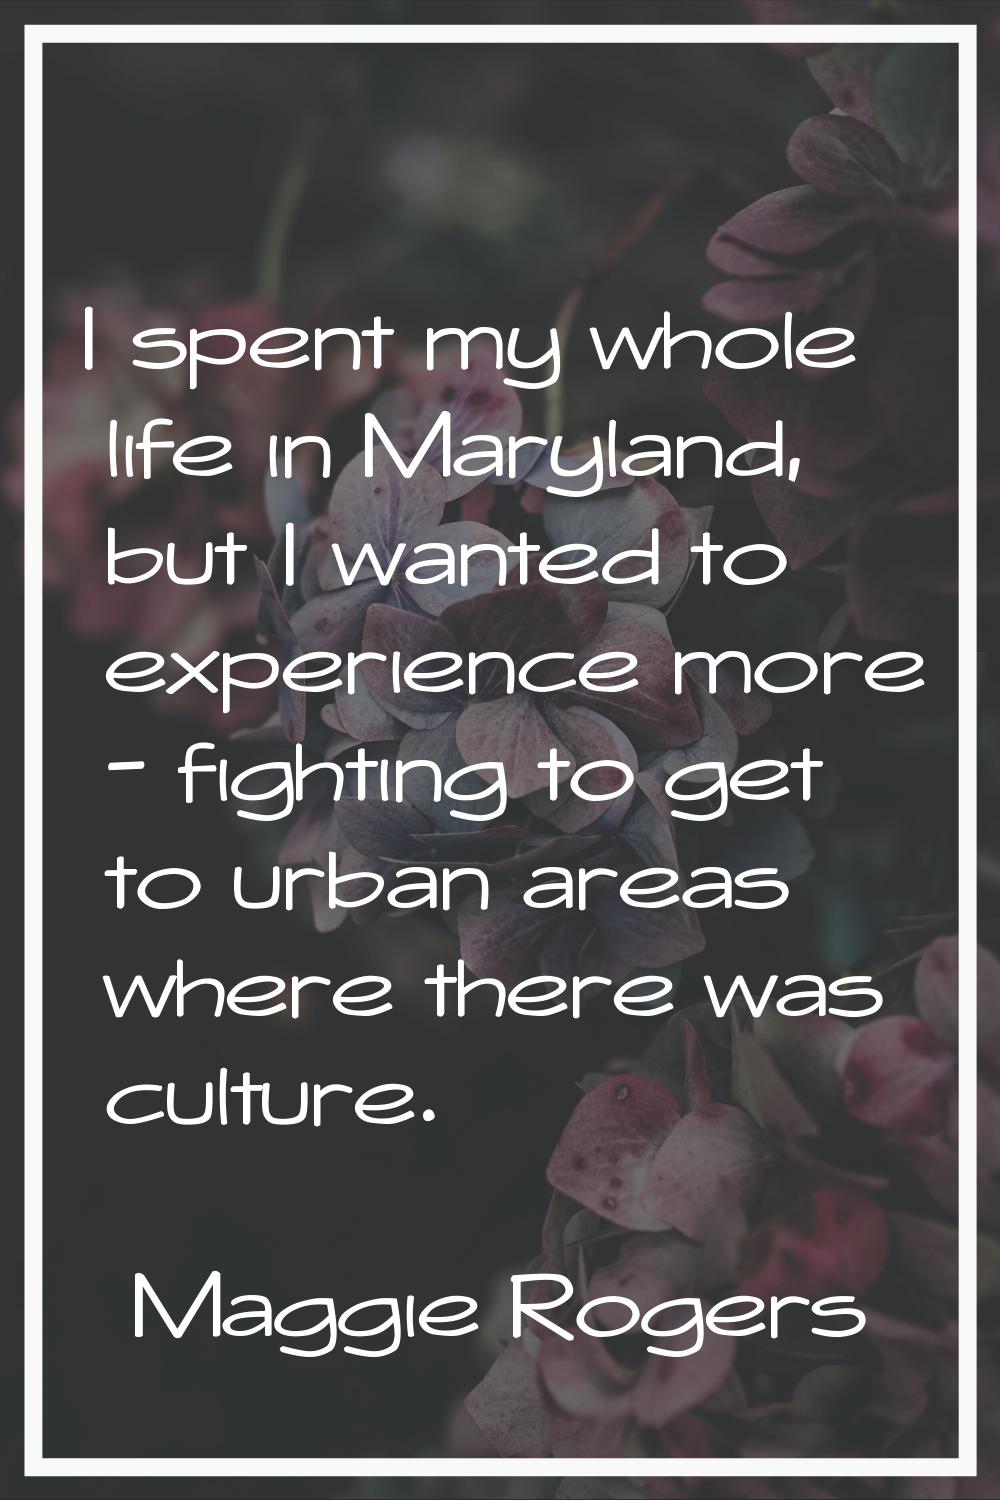 I spent my whole life in Maryland, but I wanted to experience more - fighting to get to urban areas